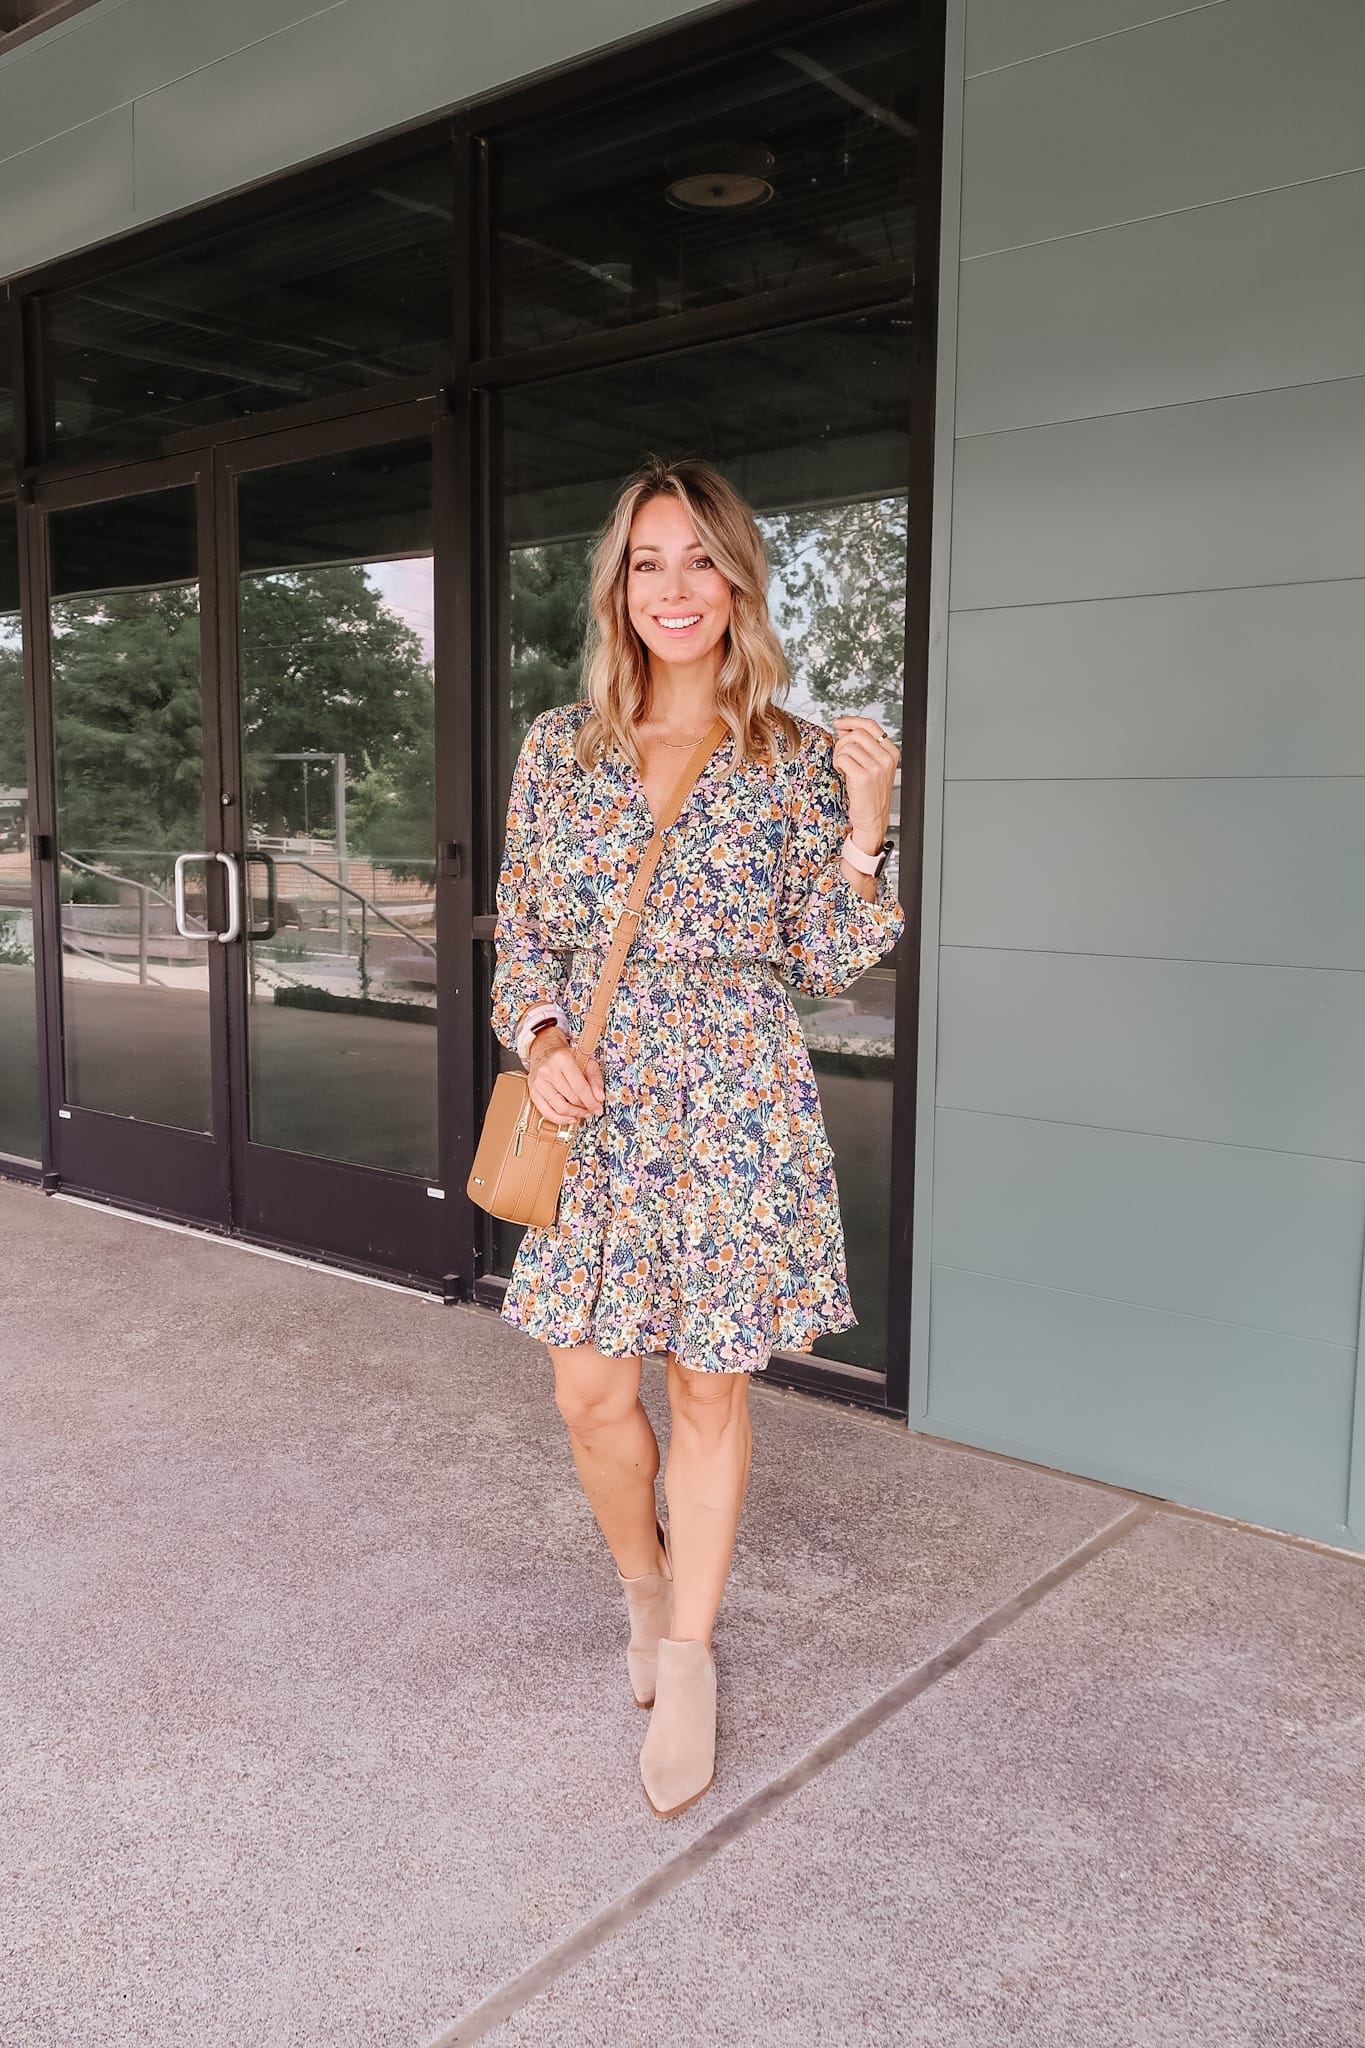 Outfits Lately, Floral Dress, Booties, Crossbody 